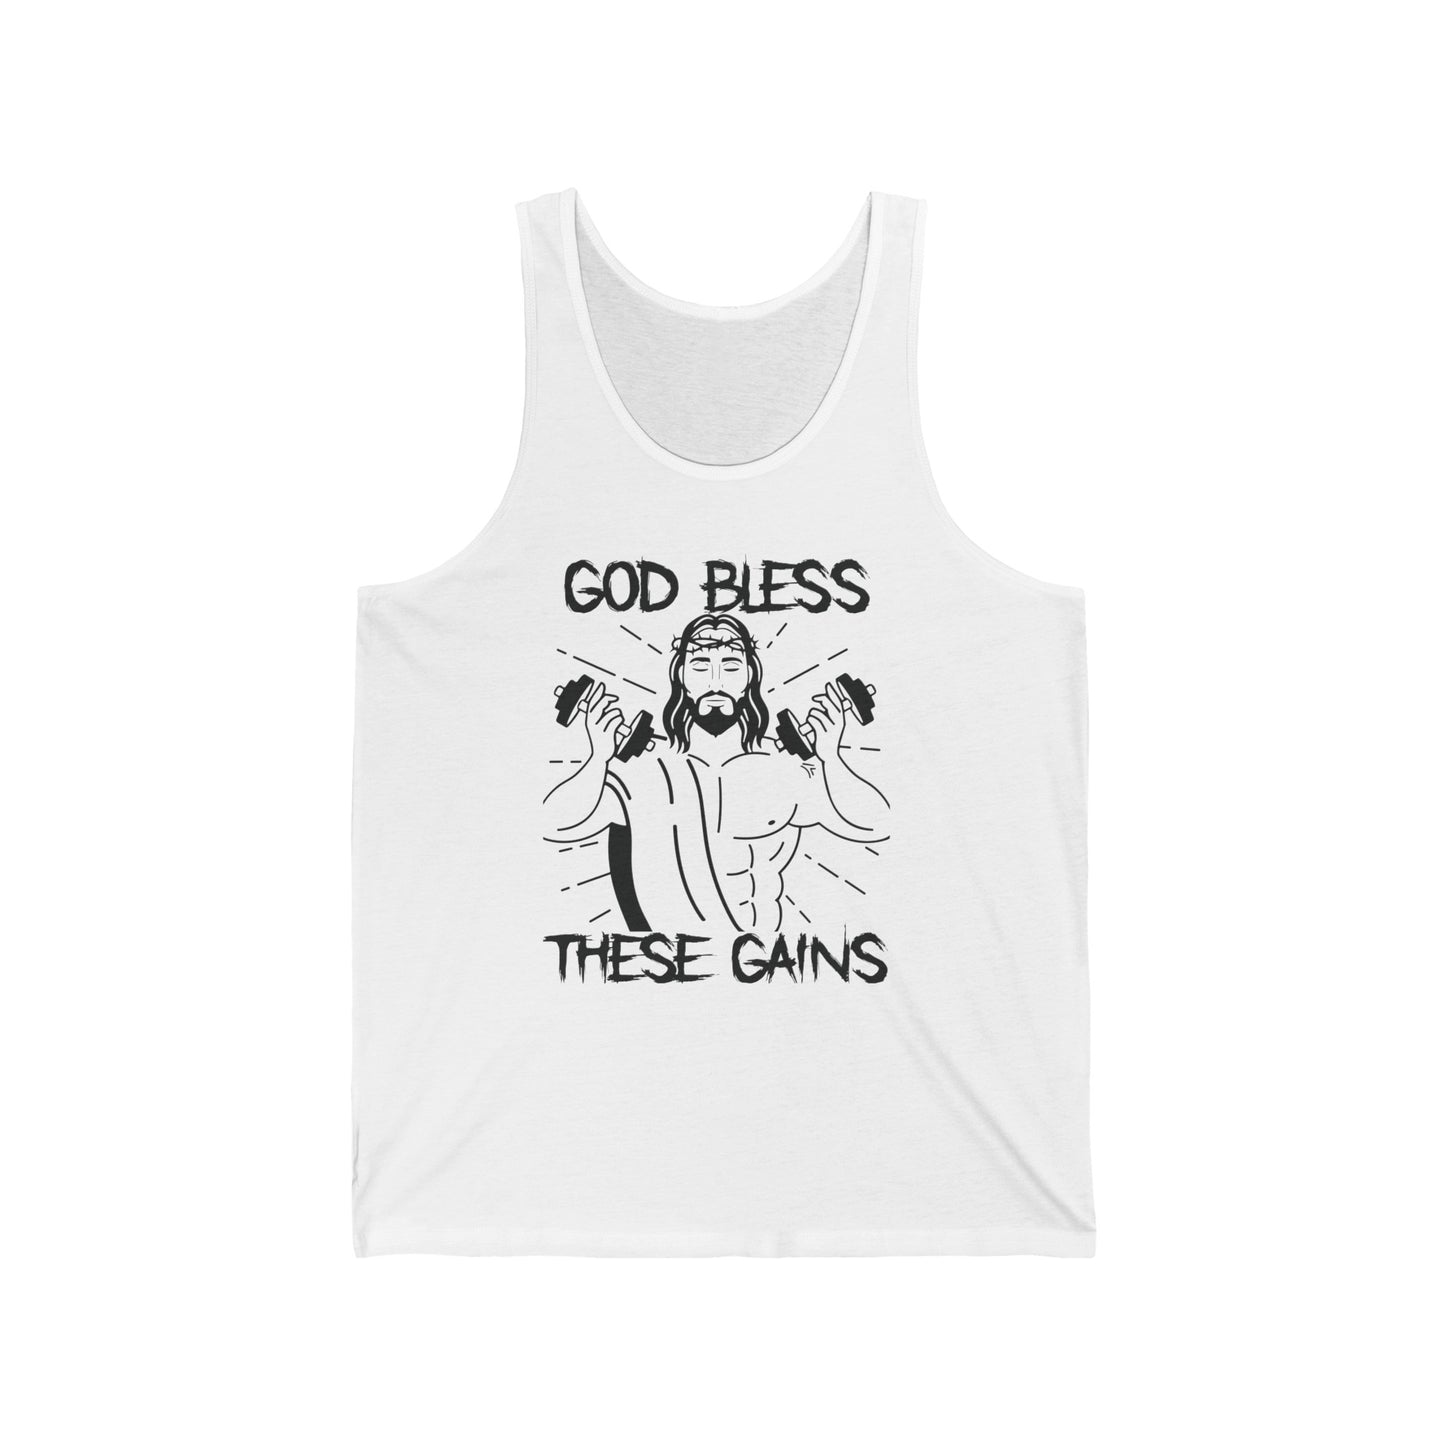 God Bless These Gains Workout Tank Top - Ripped Jesus Gym Muscle Sleeveless Shirt -  Funny Religious Fitness White Tank For Men Women